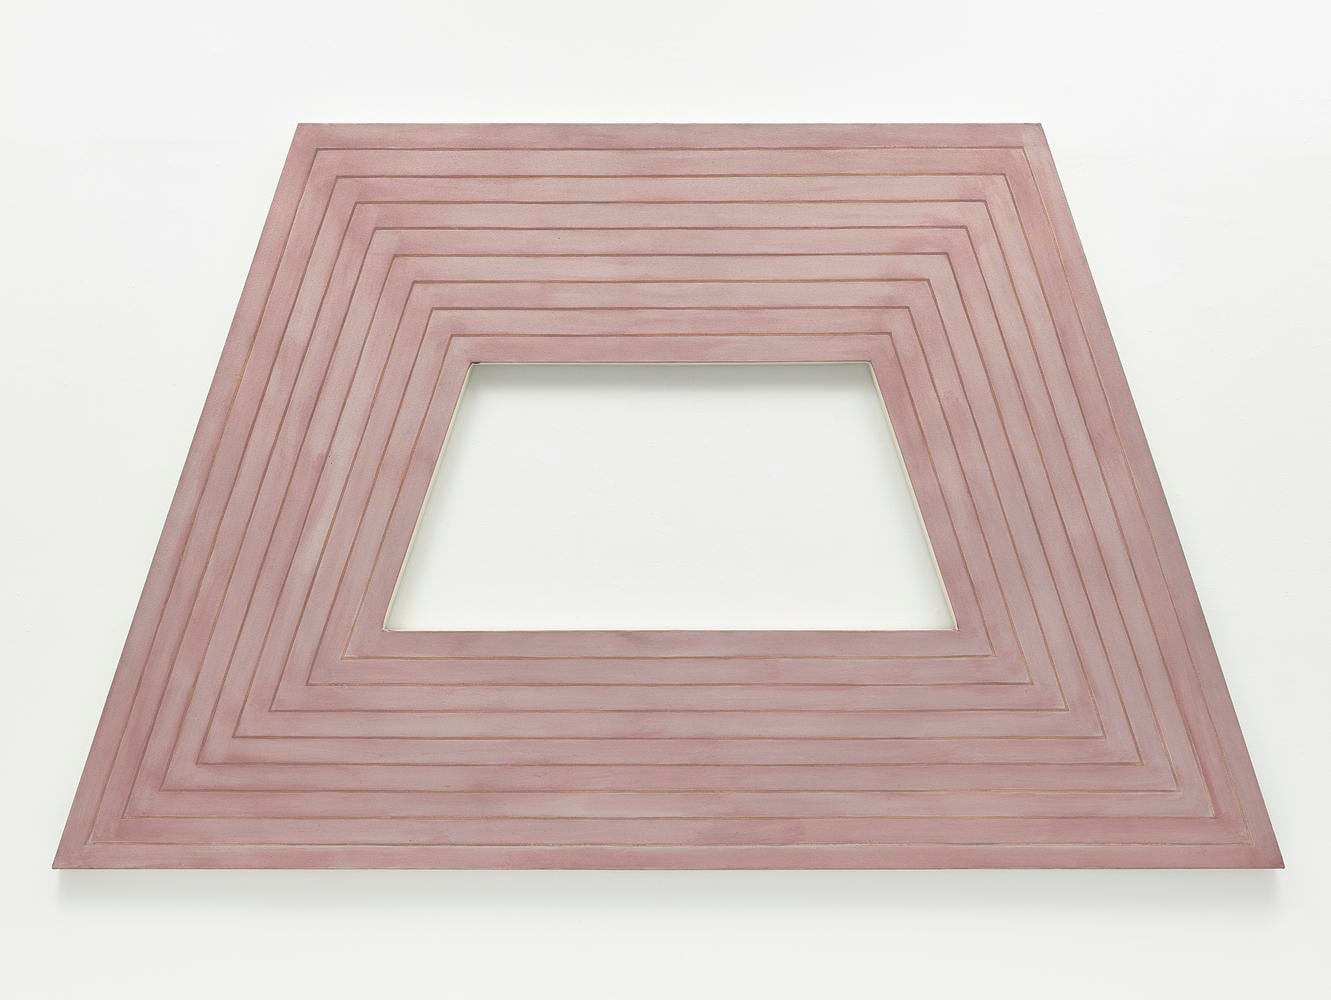 Frank Stella
Ileana Sonnabend
1963
metallic paint on canvas
72 3/4&amp;nbsp; x 128 inches (184.8 x 325.1 cm)
Private collection